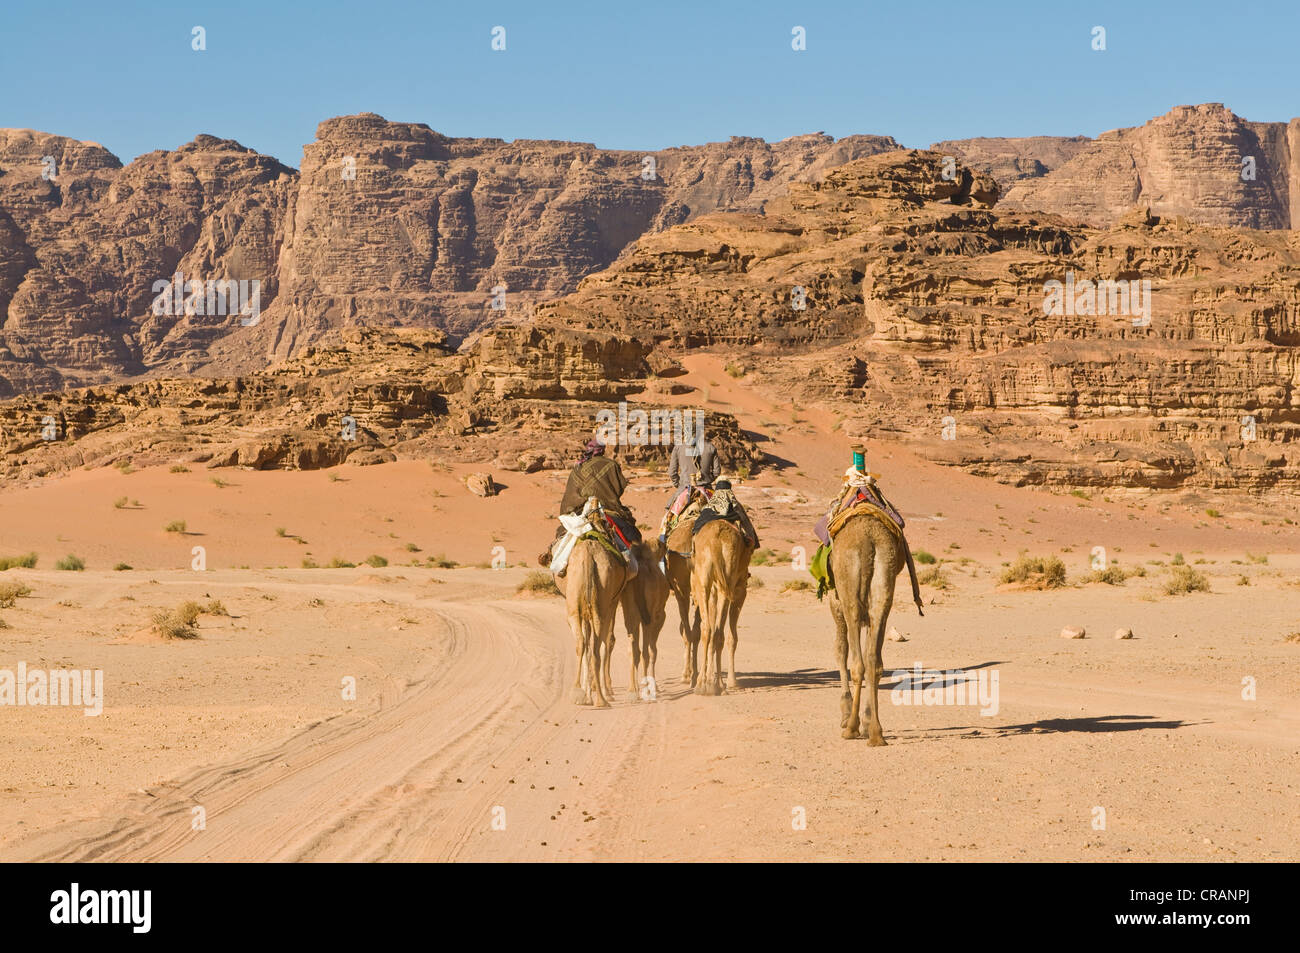 Bedouins with camels in the desert, Wadi Rum, Jordan, Middle East Stock Photo